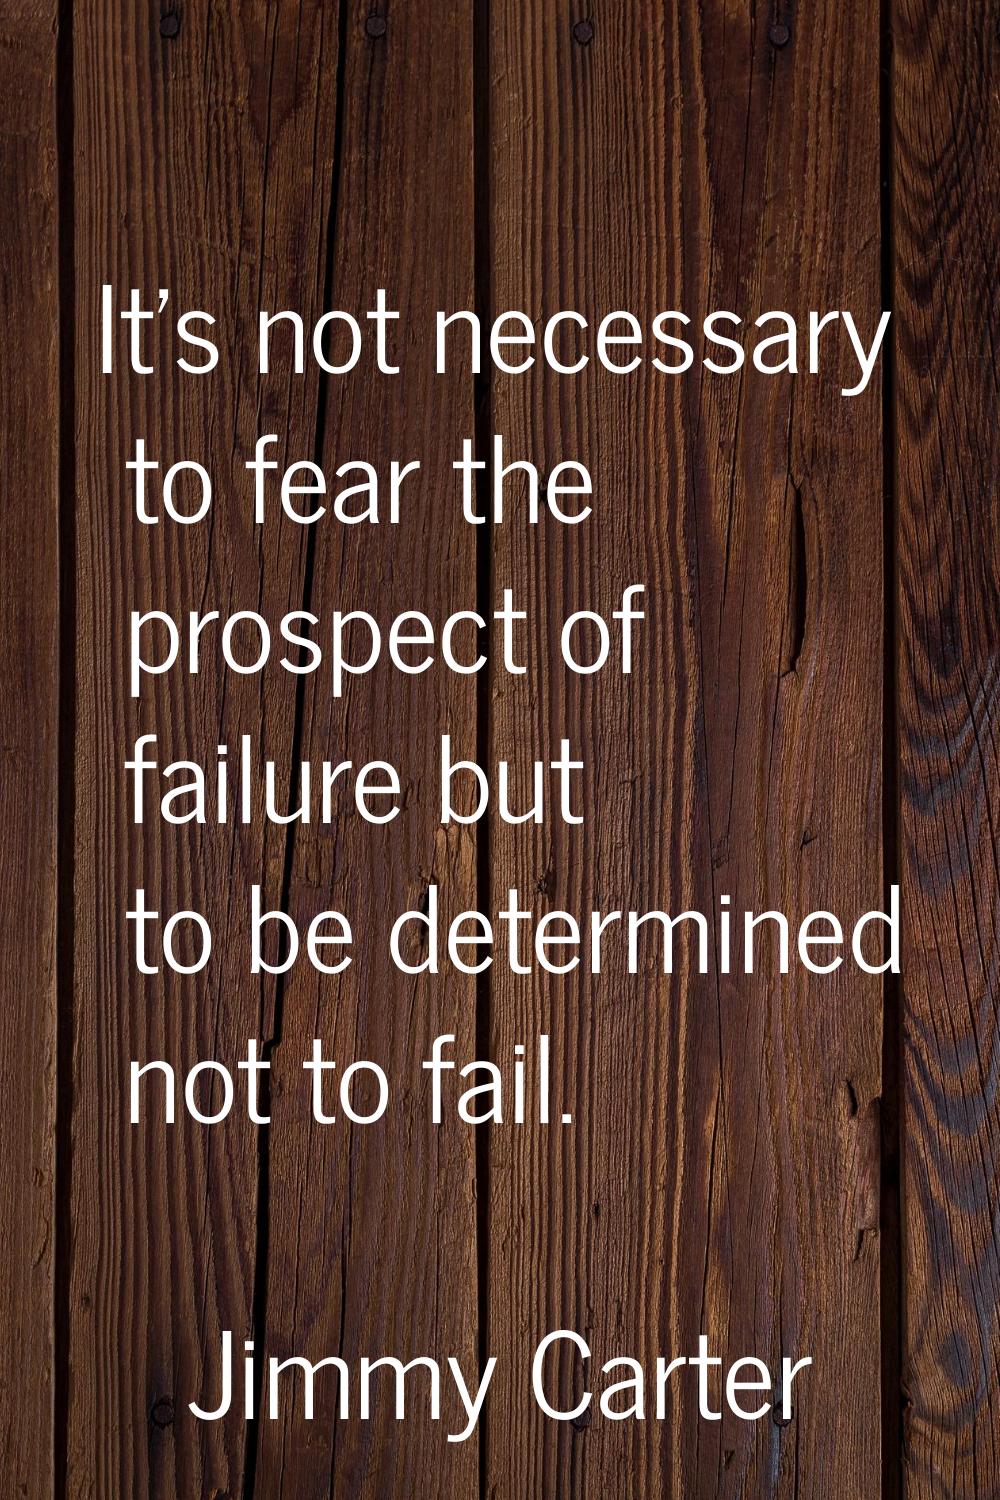 It's not necessary to fear the prospect of failure but to be determined not to fail.